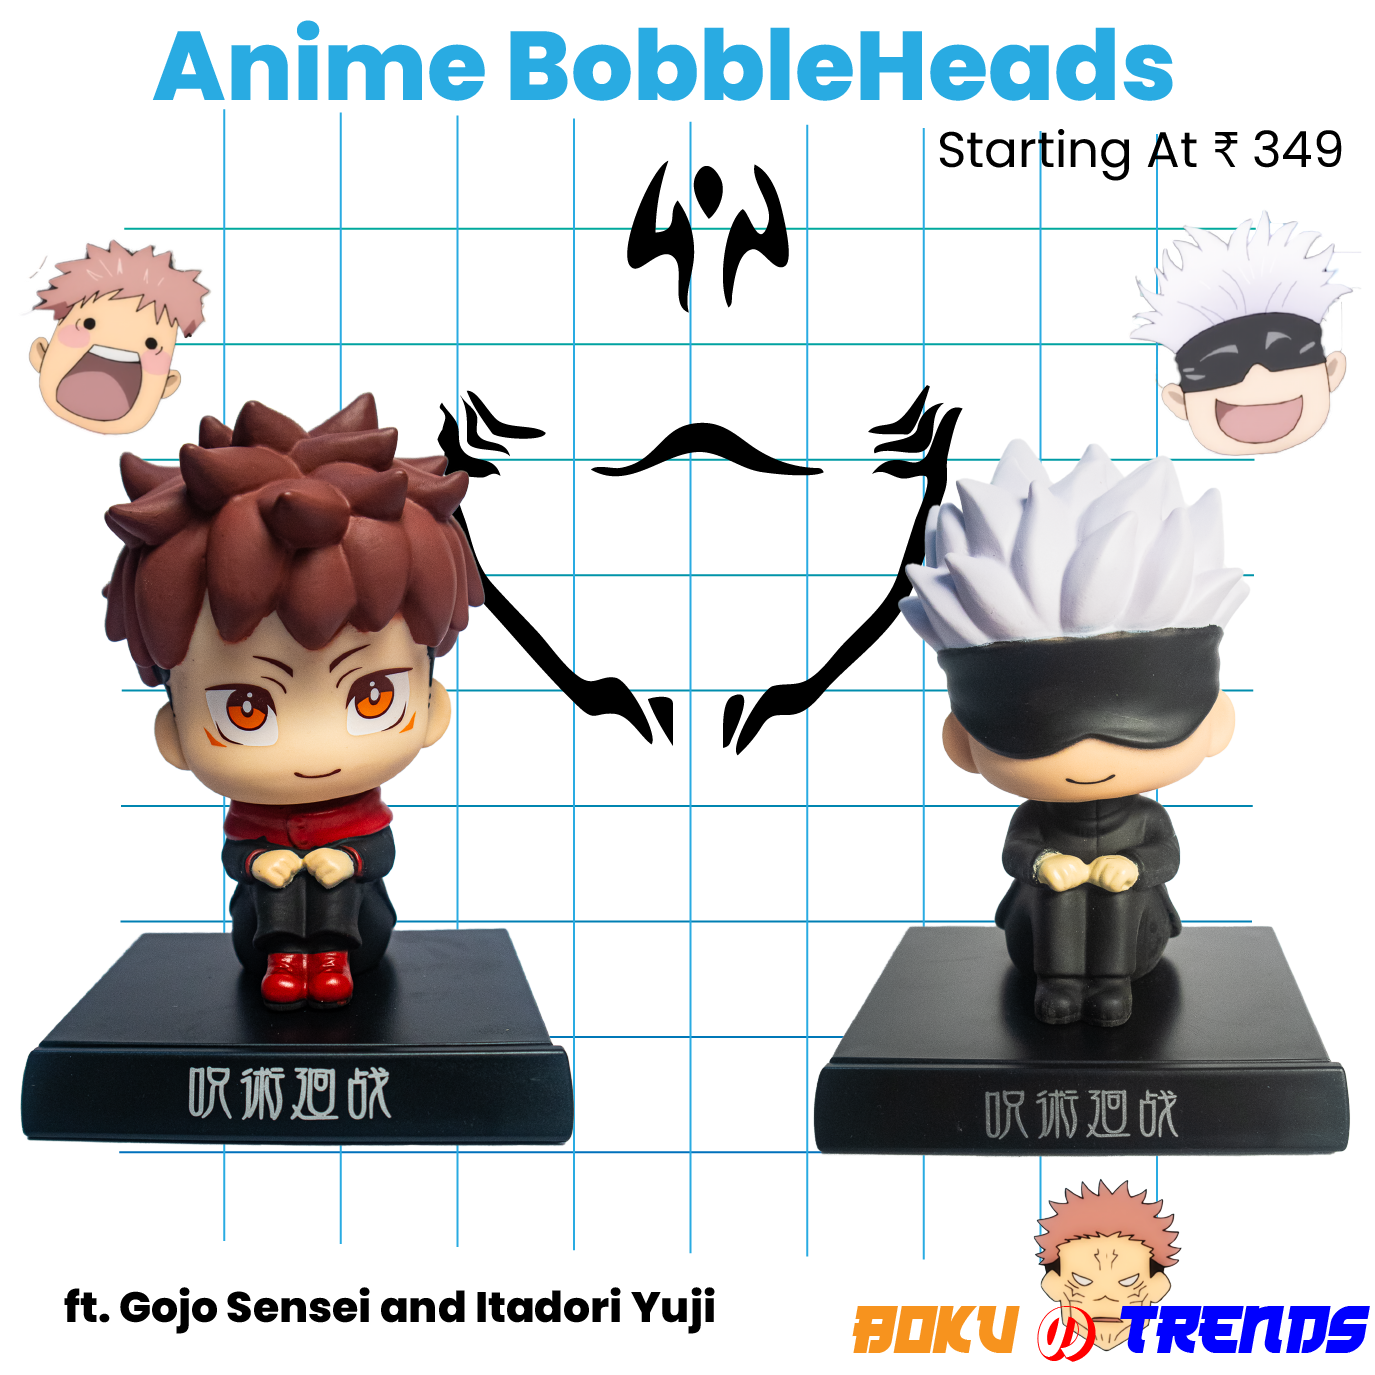 High Quality Anime Clothing, Action Figures, Bobble Heads, Keychains and More on Bokunotrends.com